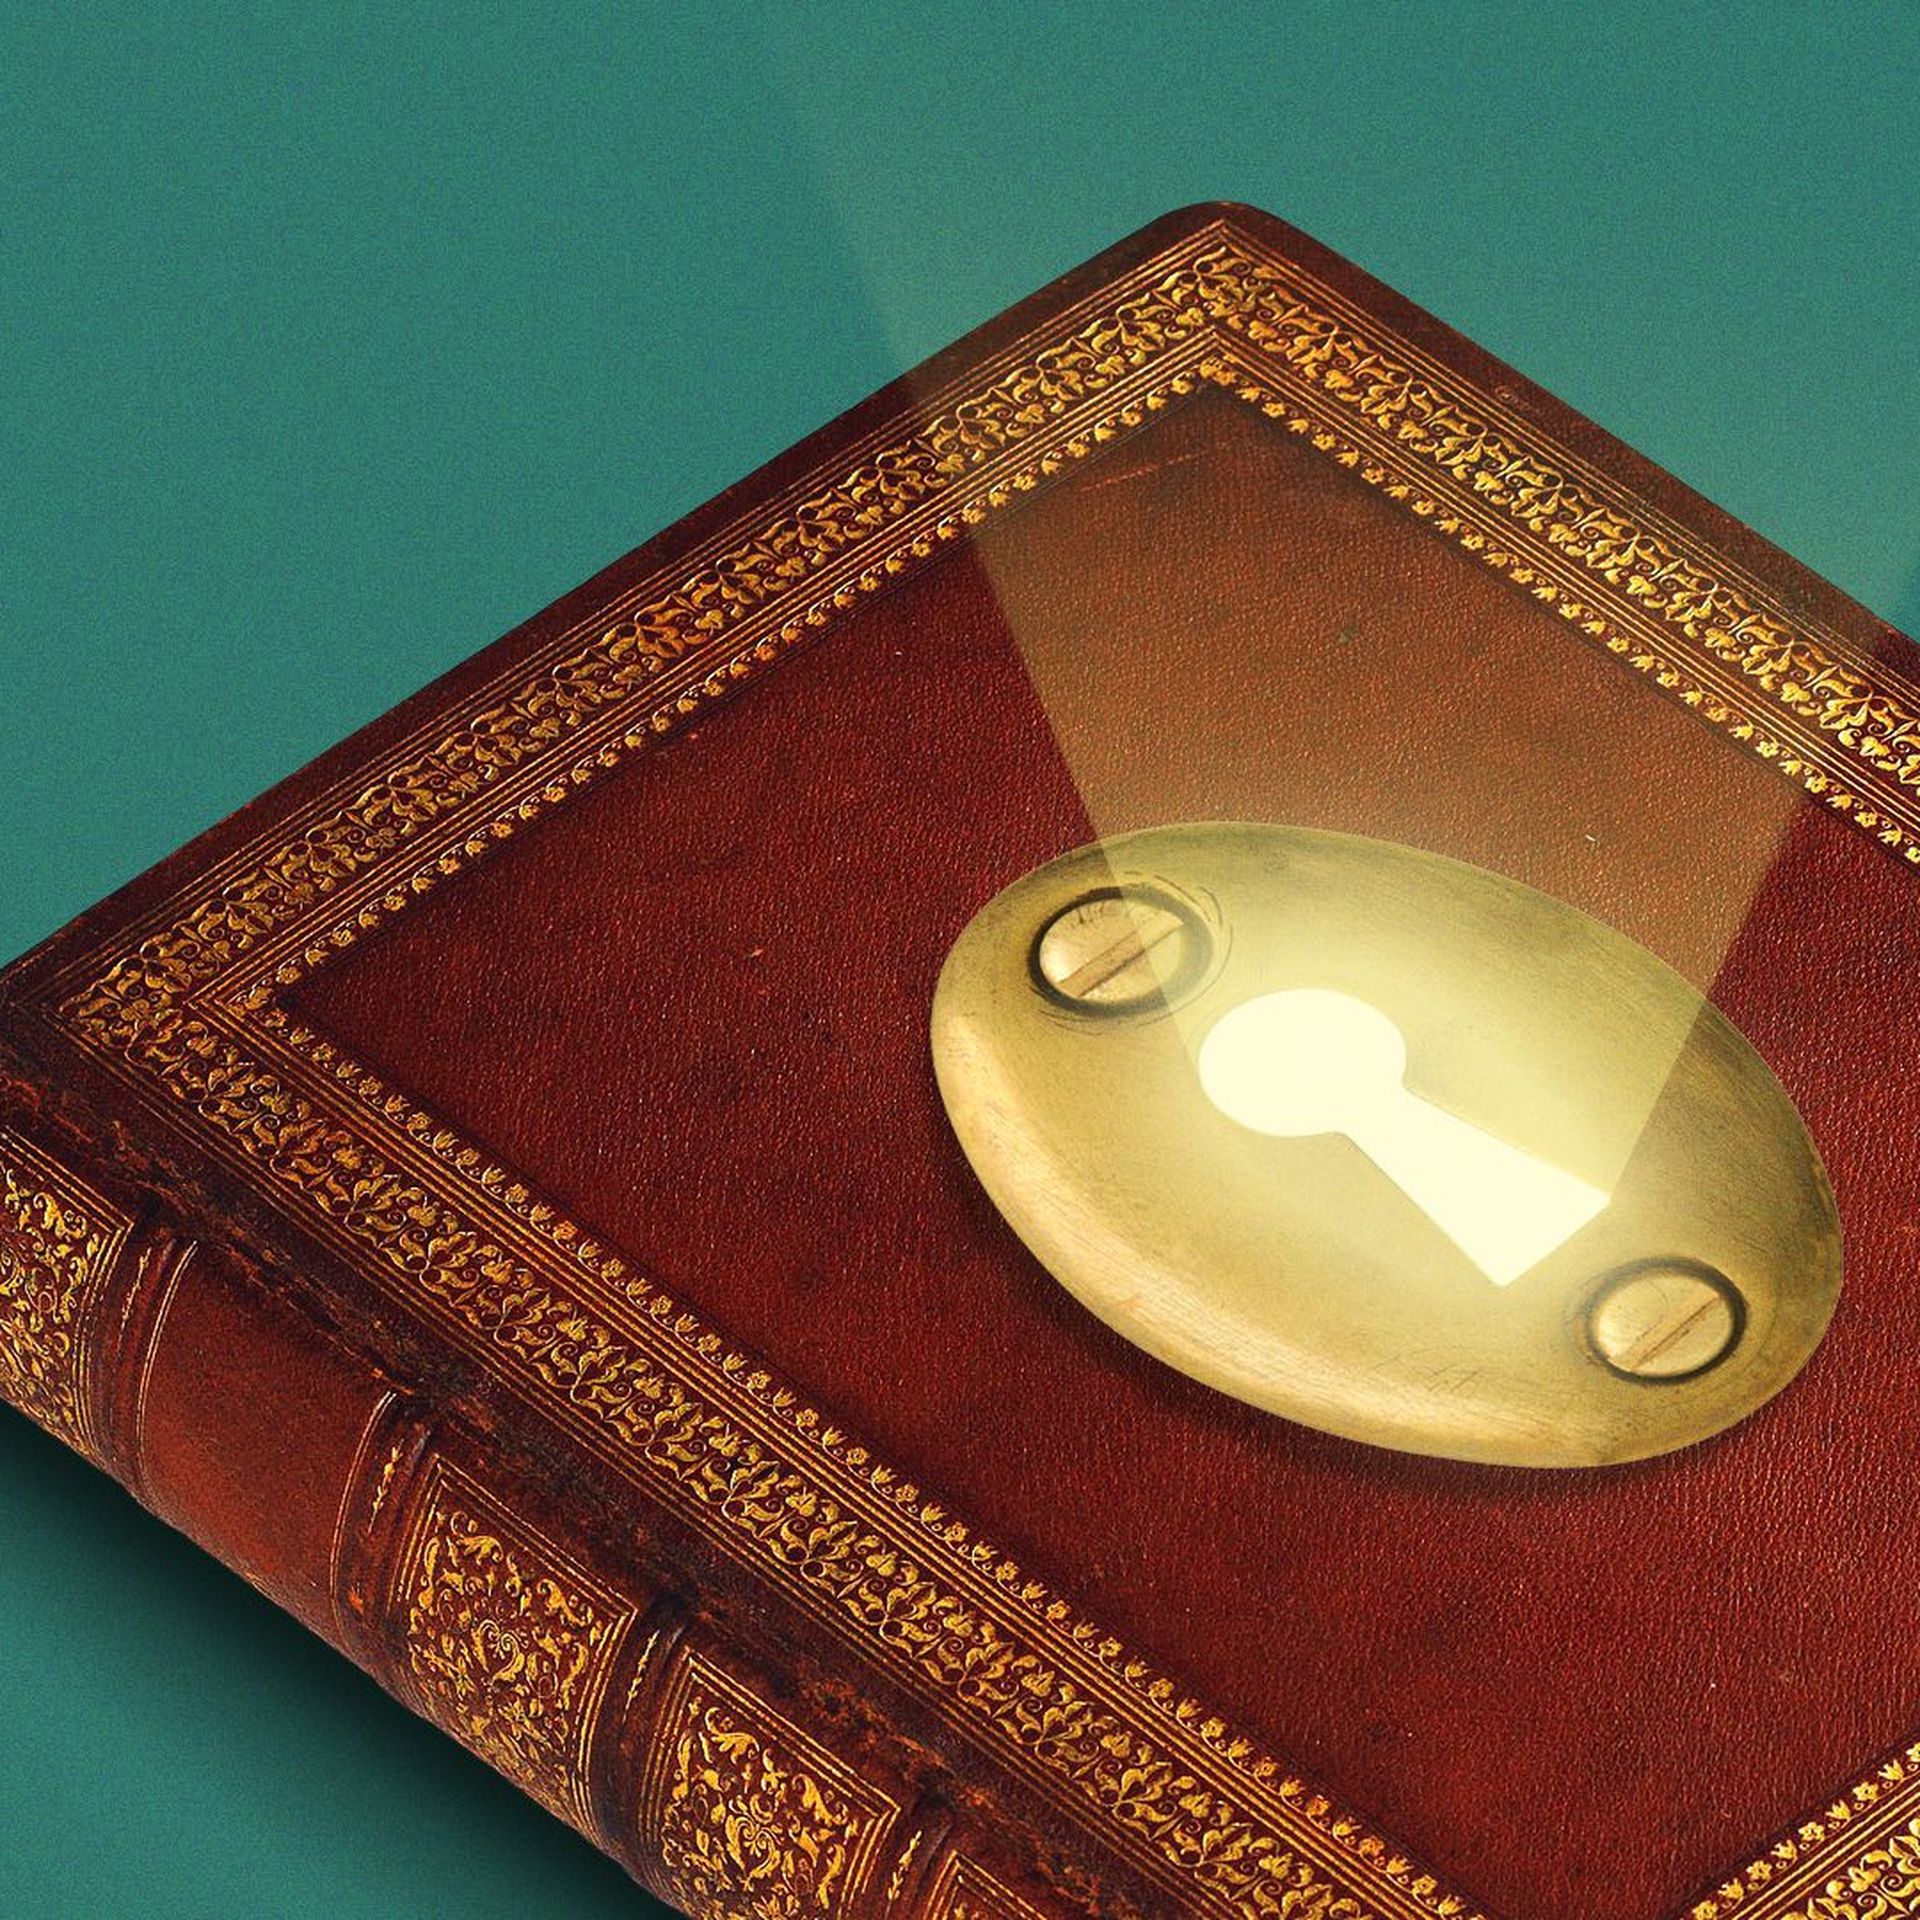 Illustration of a glowing keyhole on an old book.